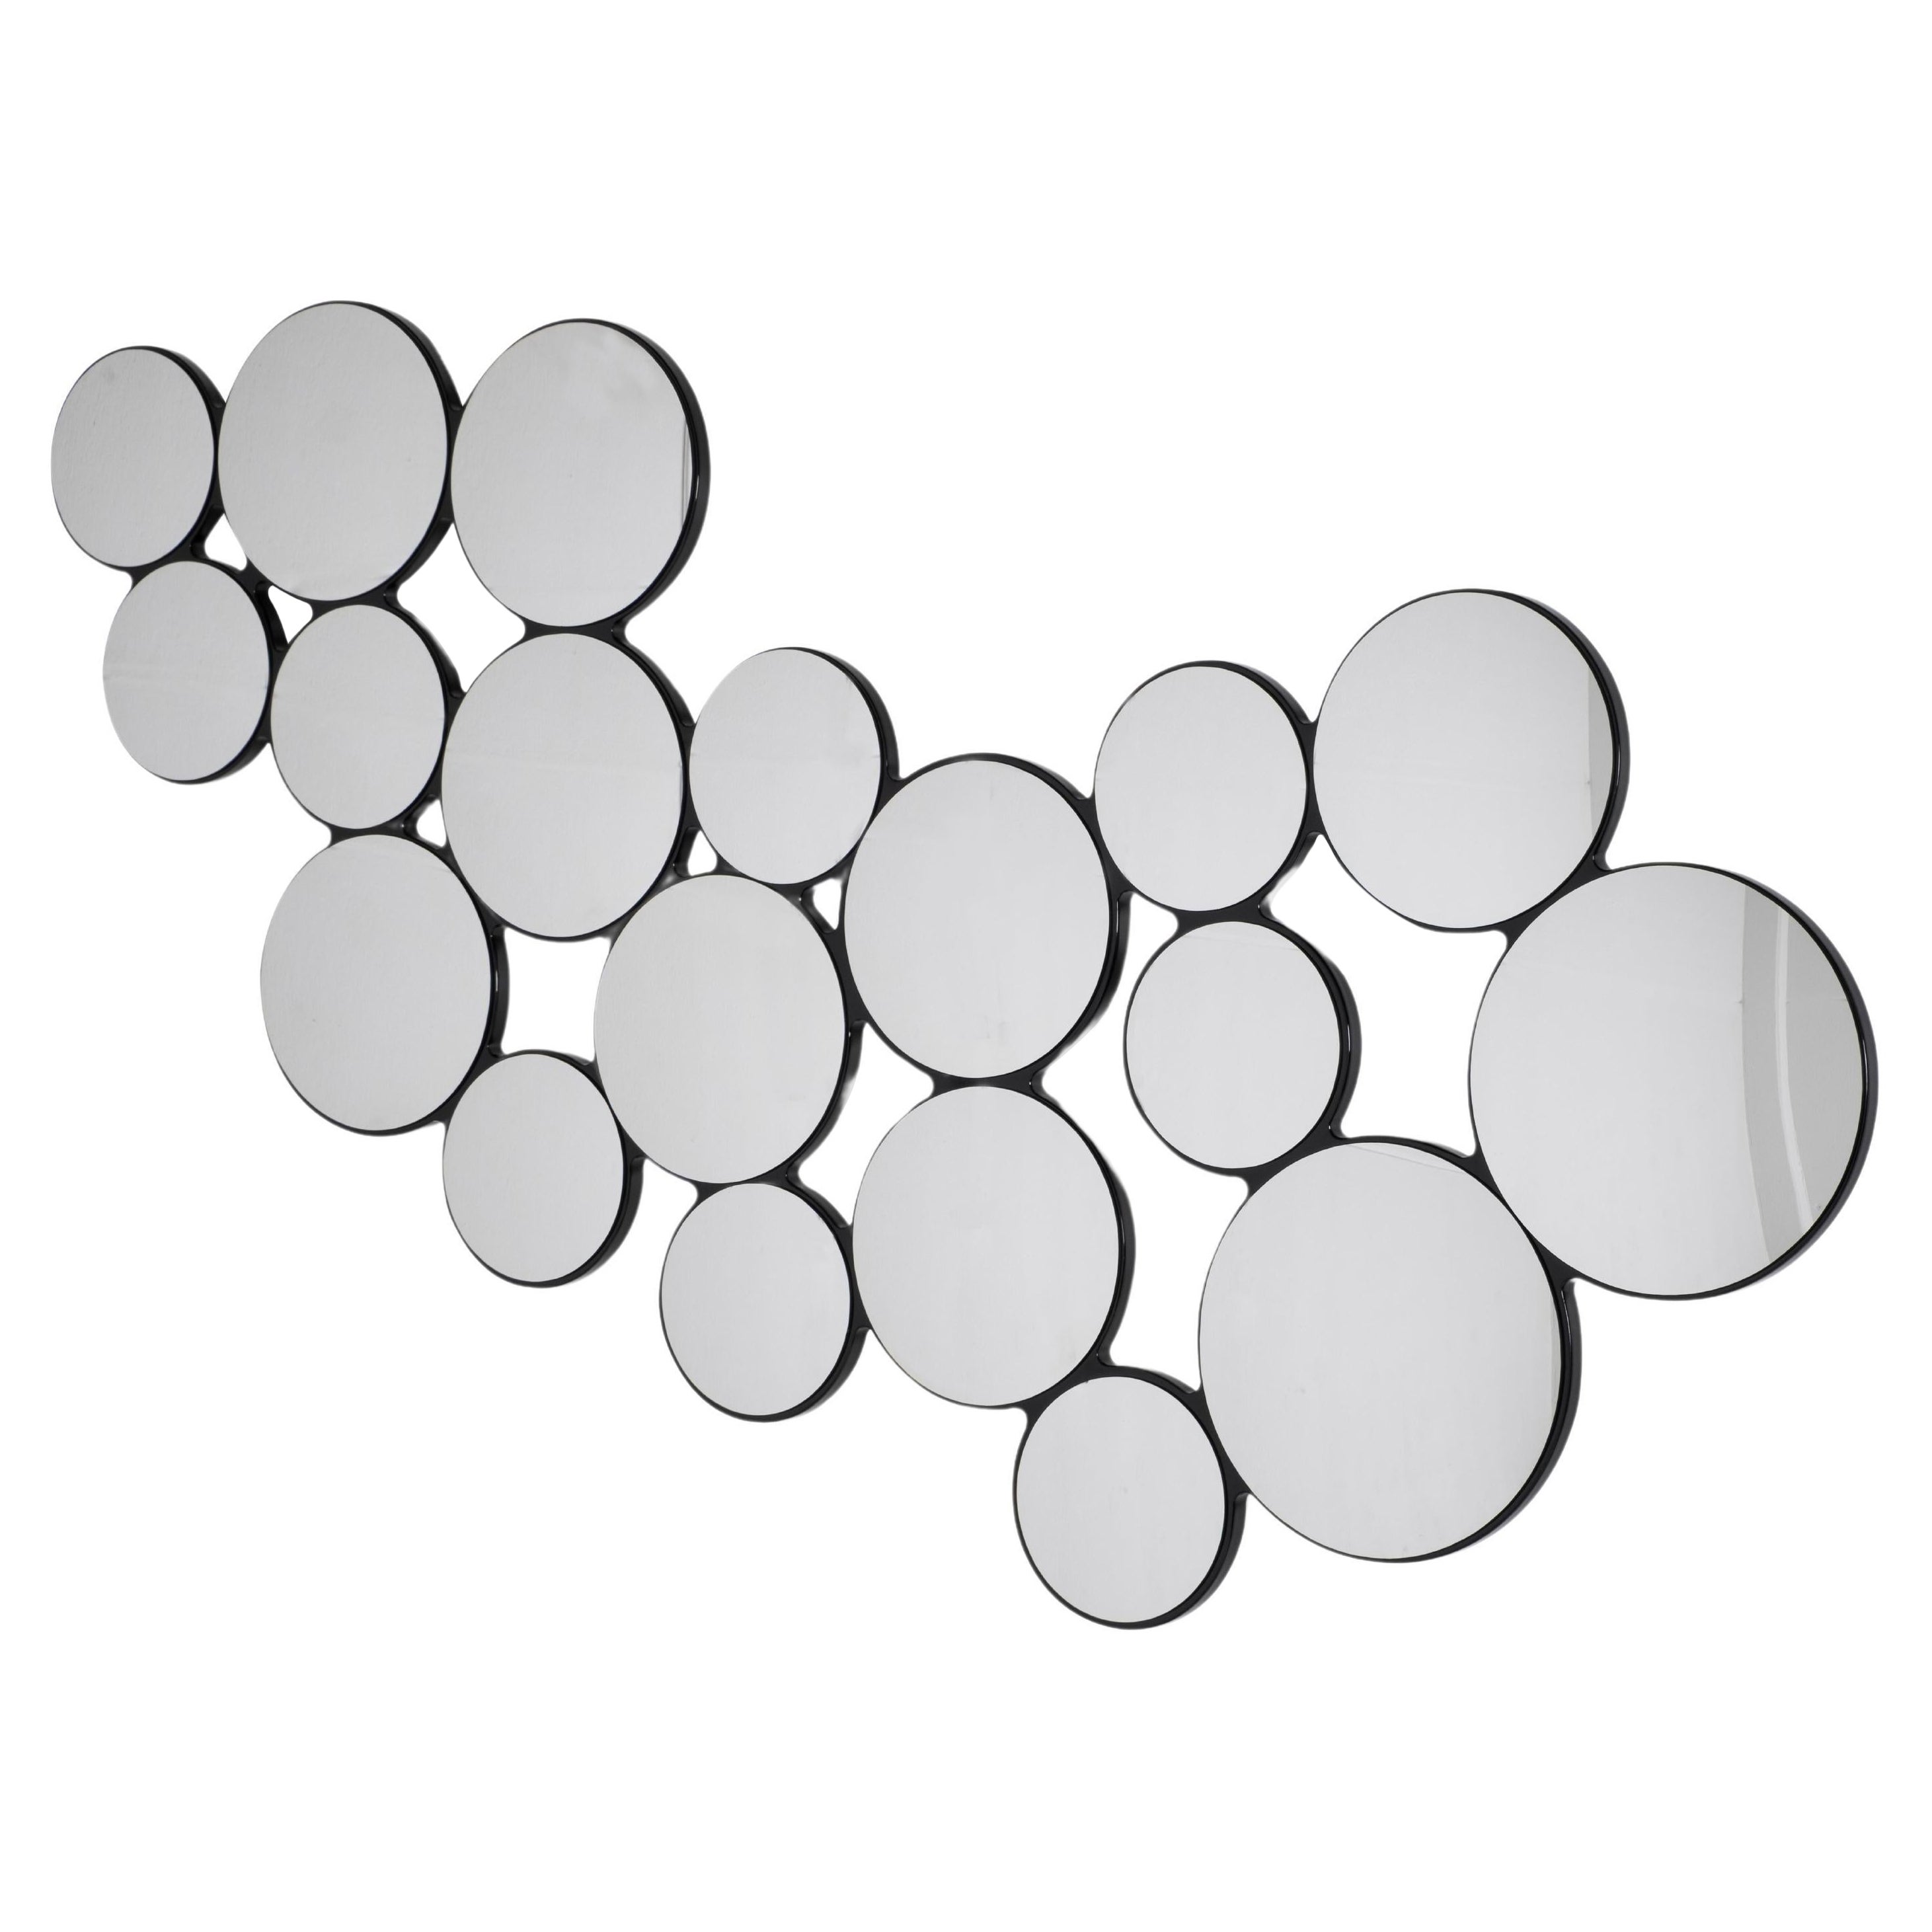 Modern Bubbles 19 Wall Mirror Convex Mirrors Handmade in Portugal by Greenapple For Sale